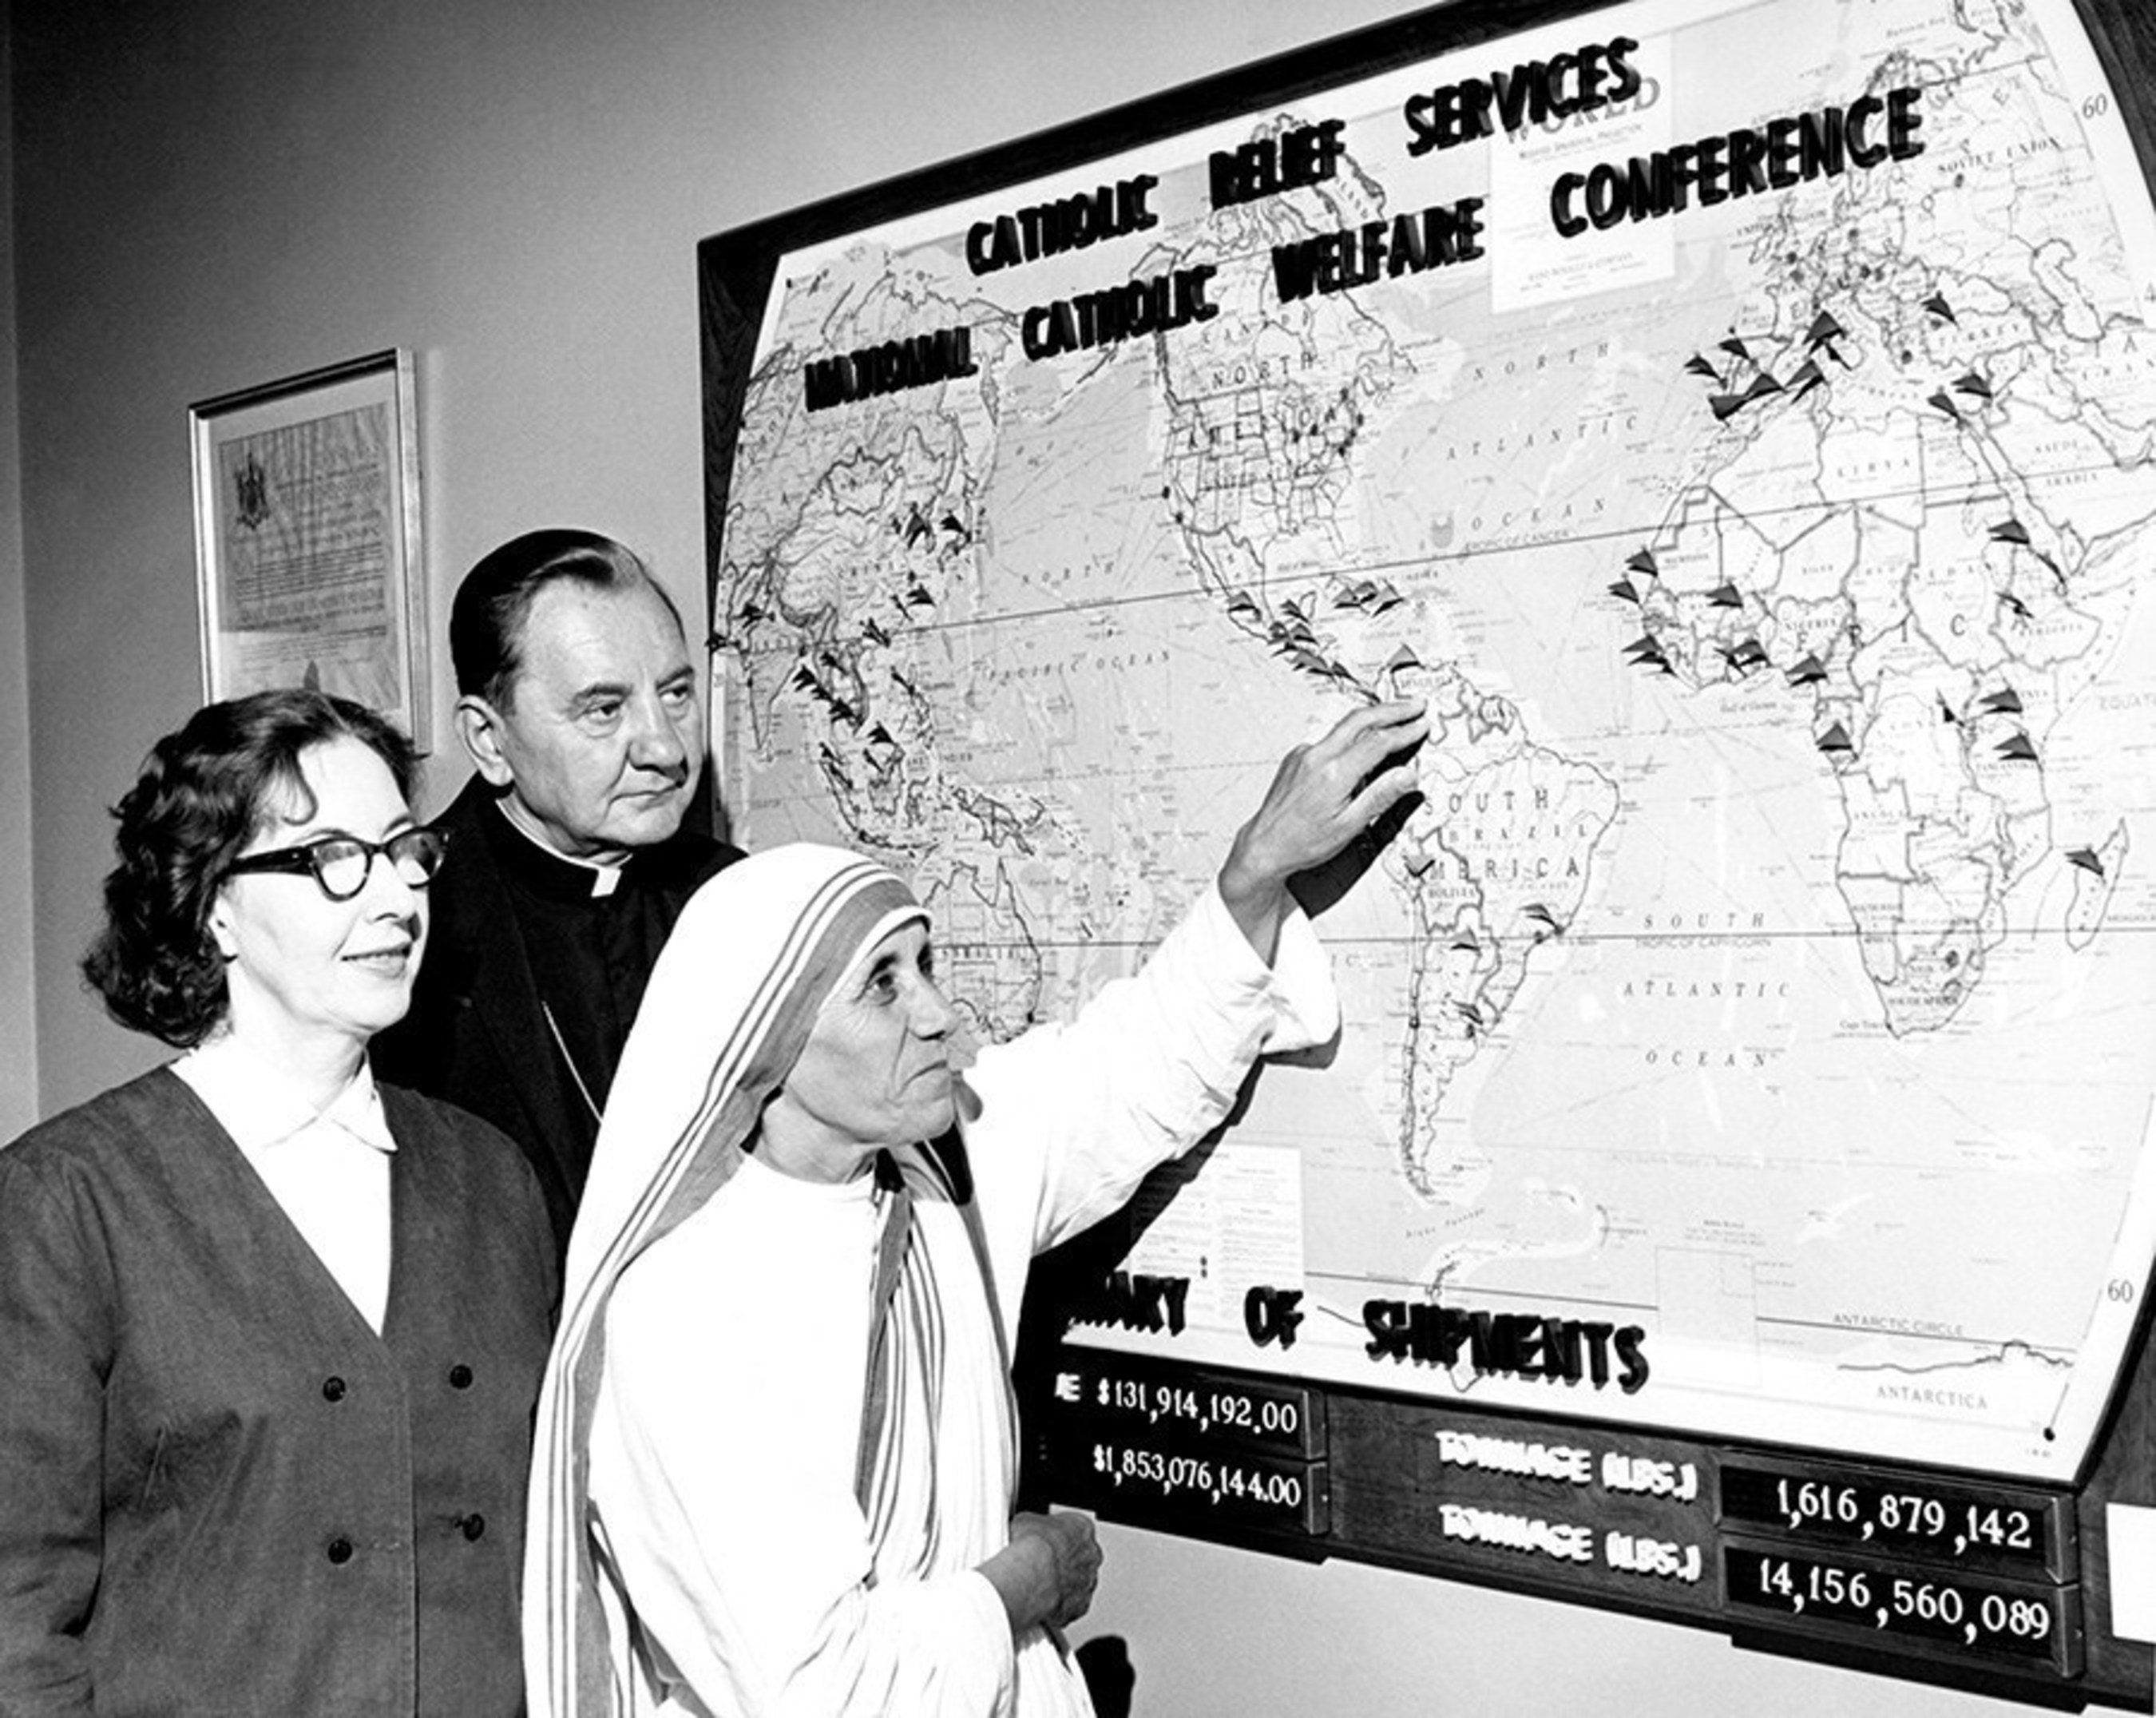 Mother Teresa during her visit to Catholic Relief Services in May 1996, Baltimore, MD. Photo from CRS Archives.